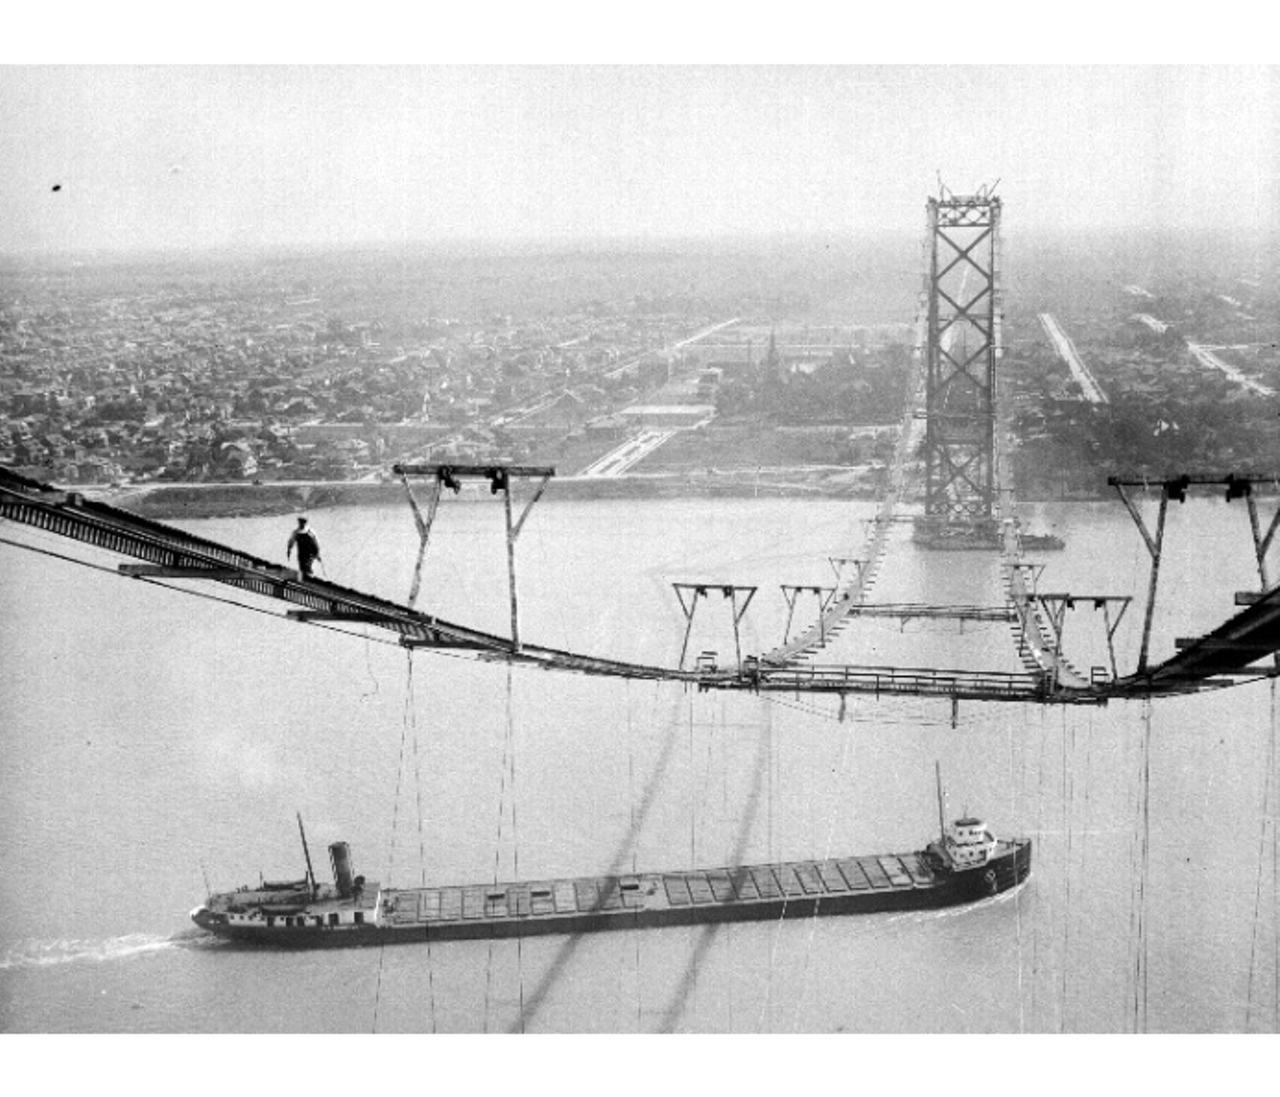 A view of a freighter from the Ambassador Bridge in 1937.